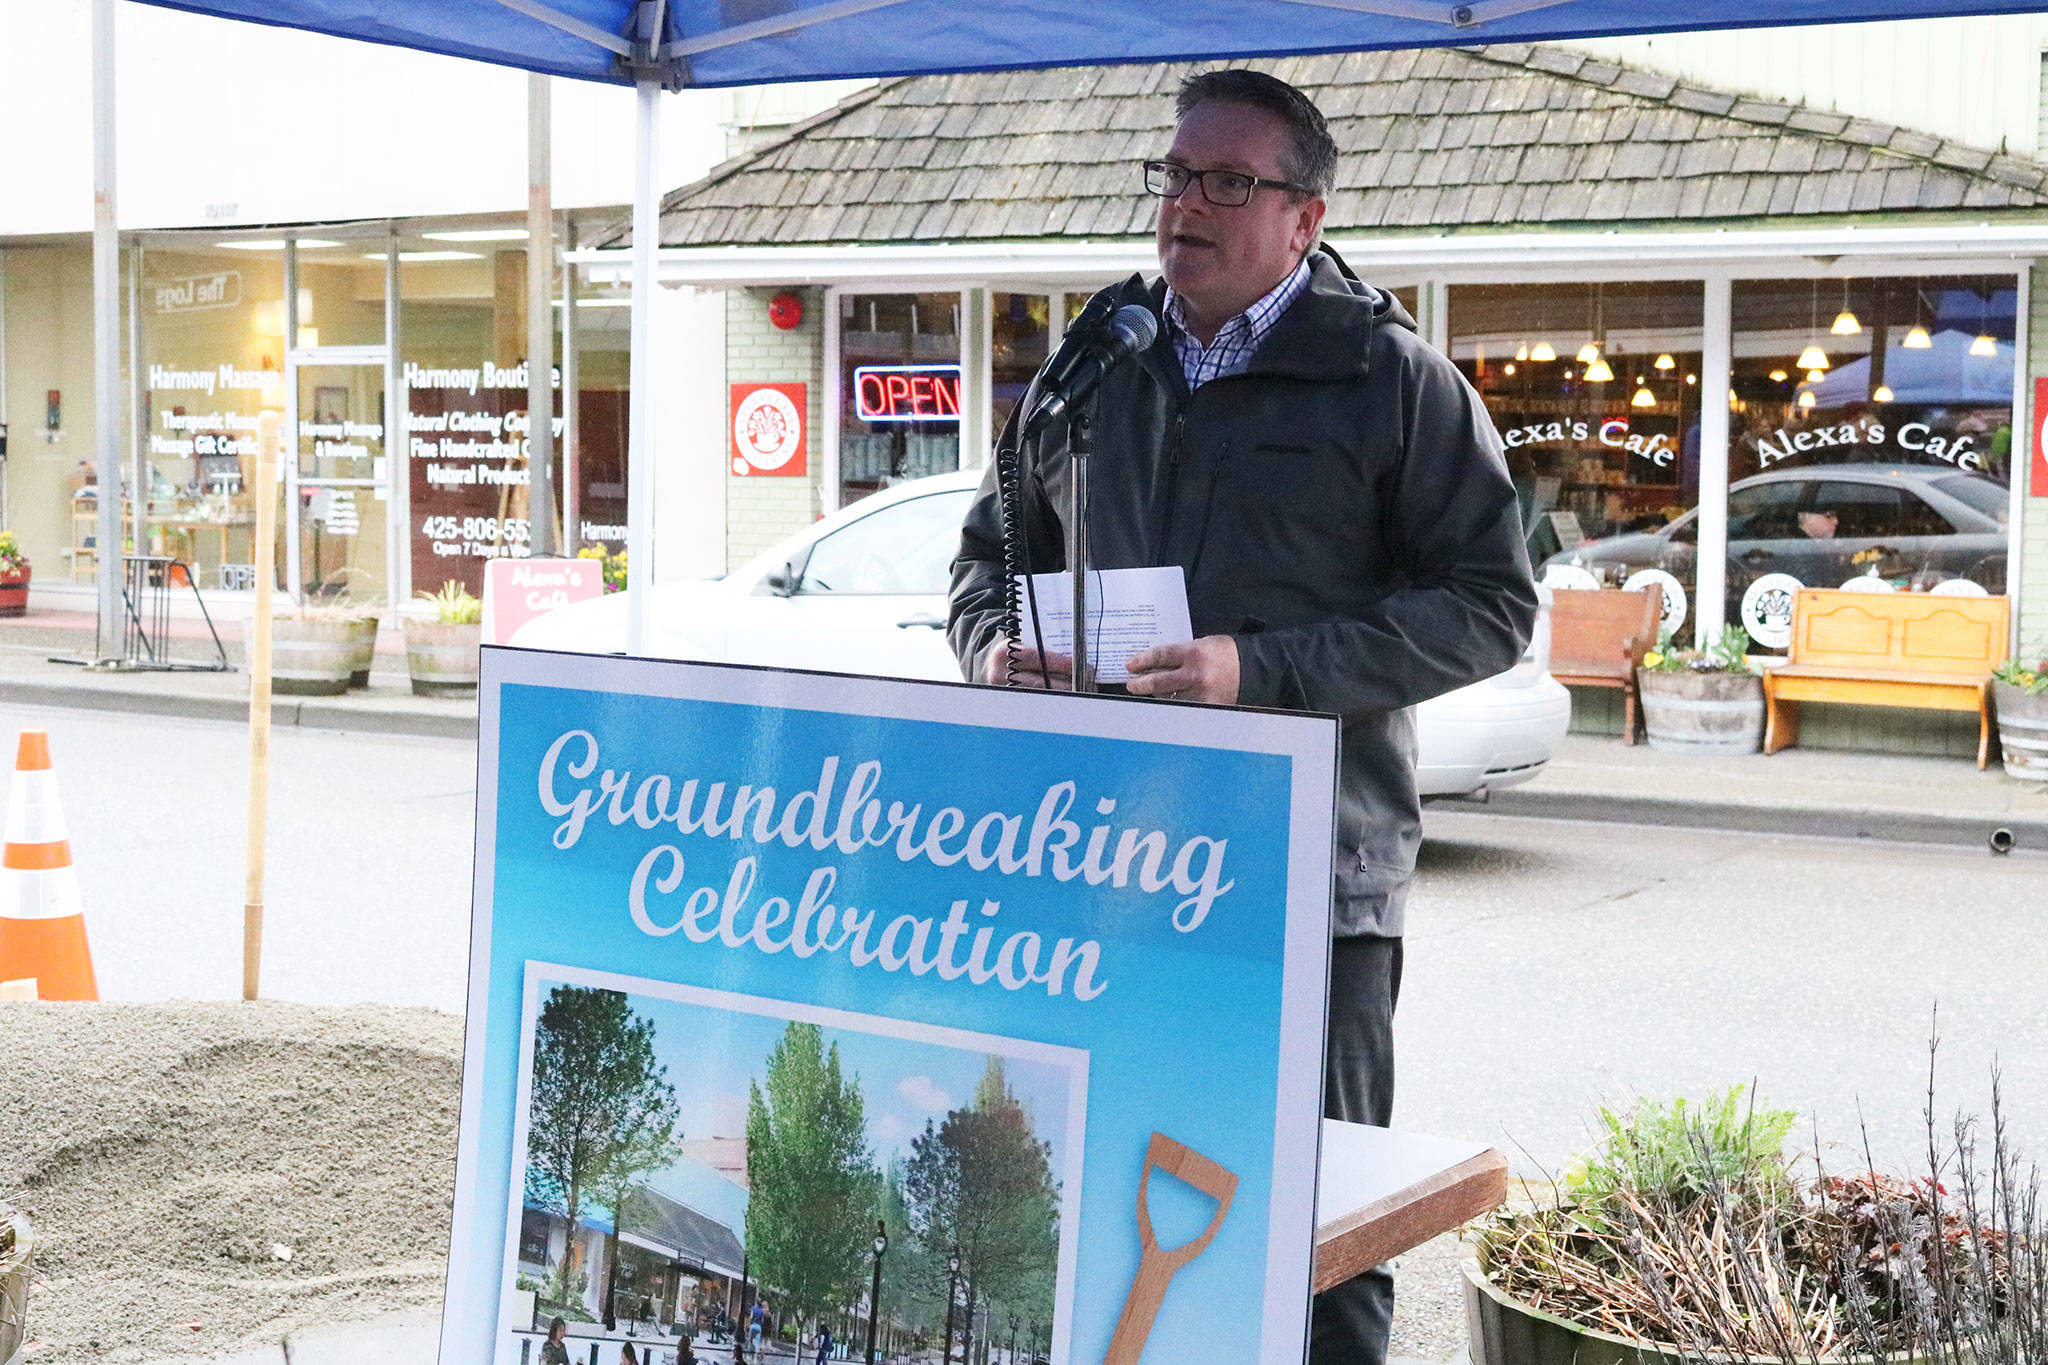 Bothell Mayor Andy Rheaume speaks during the groundbreaking ceremony for the Main Street Enhancement Project on March 28. CATHERINE KRUMMEY / Bothell Reporter